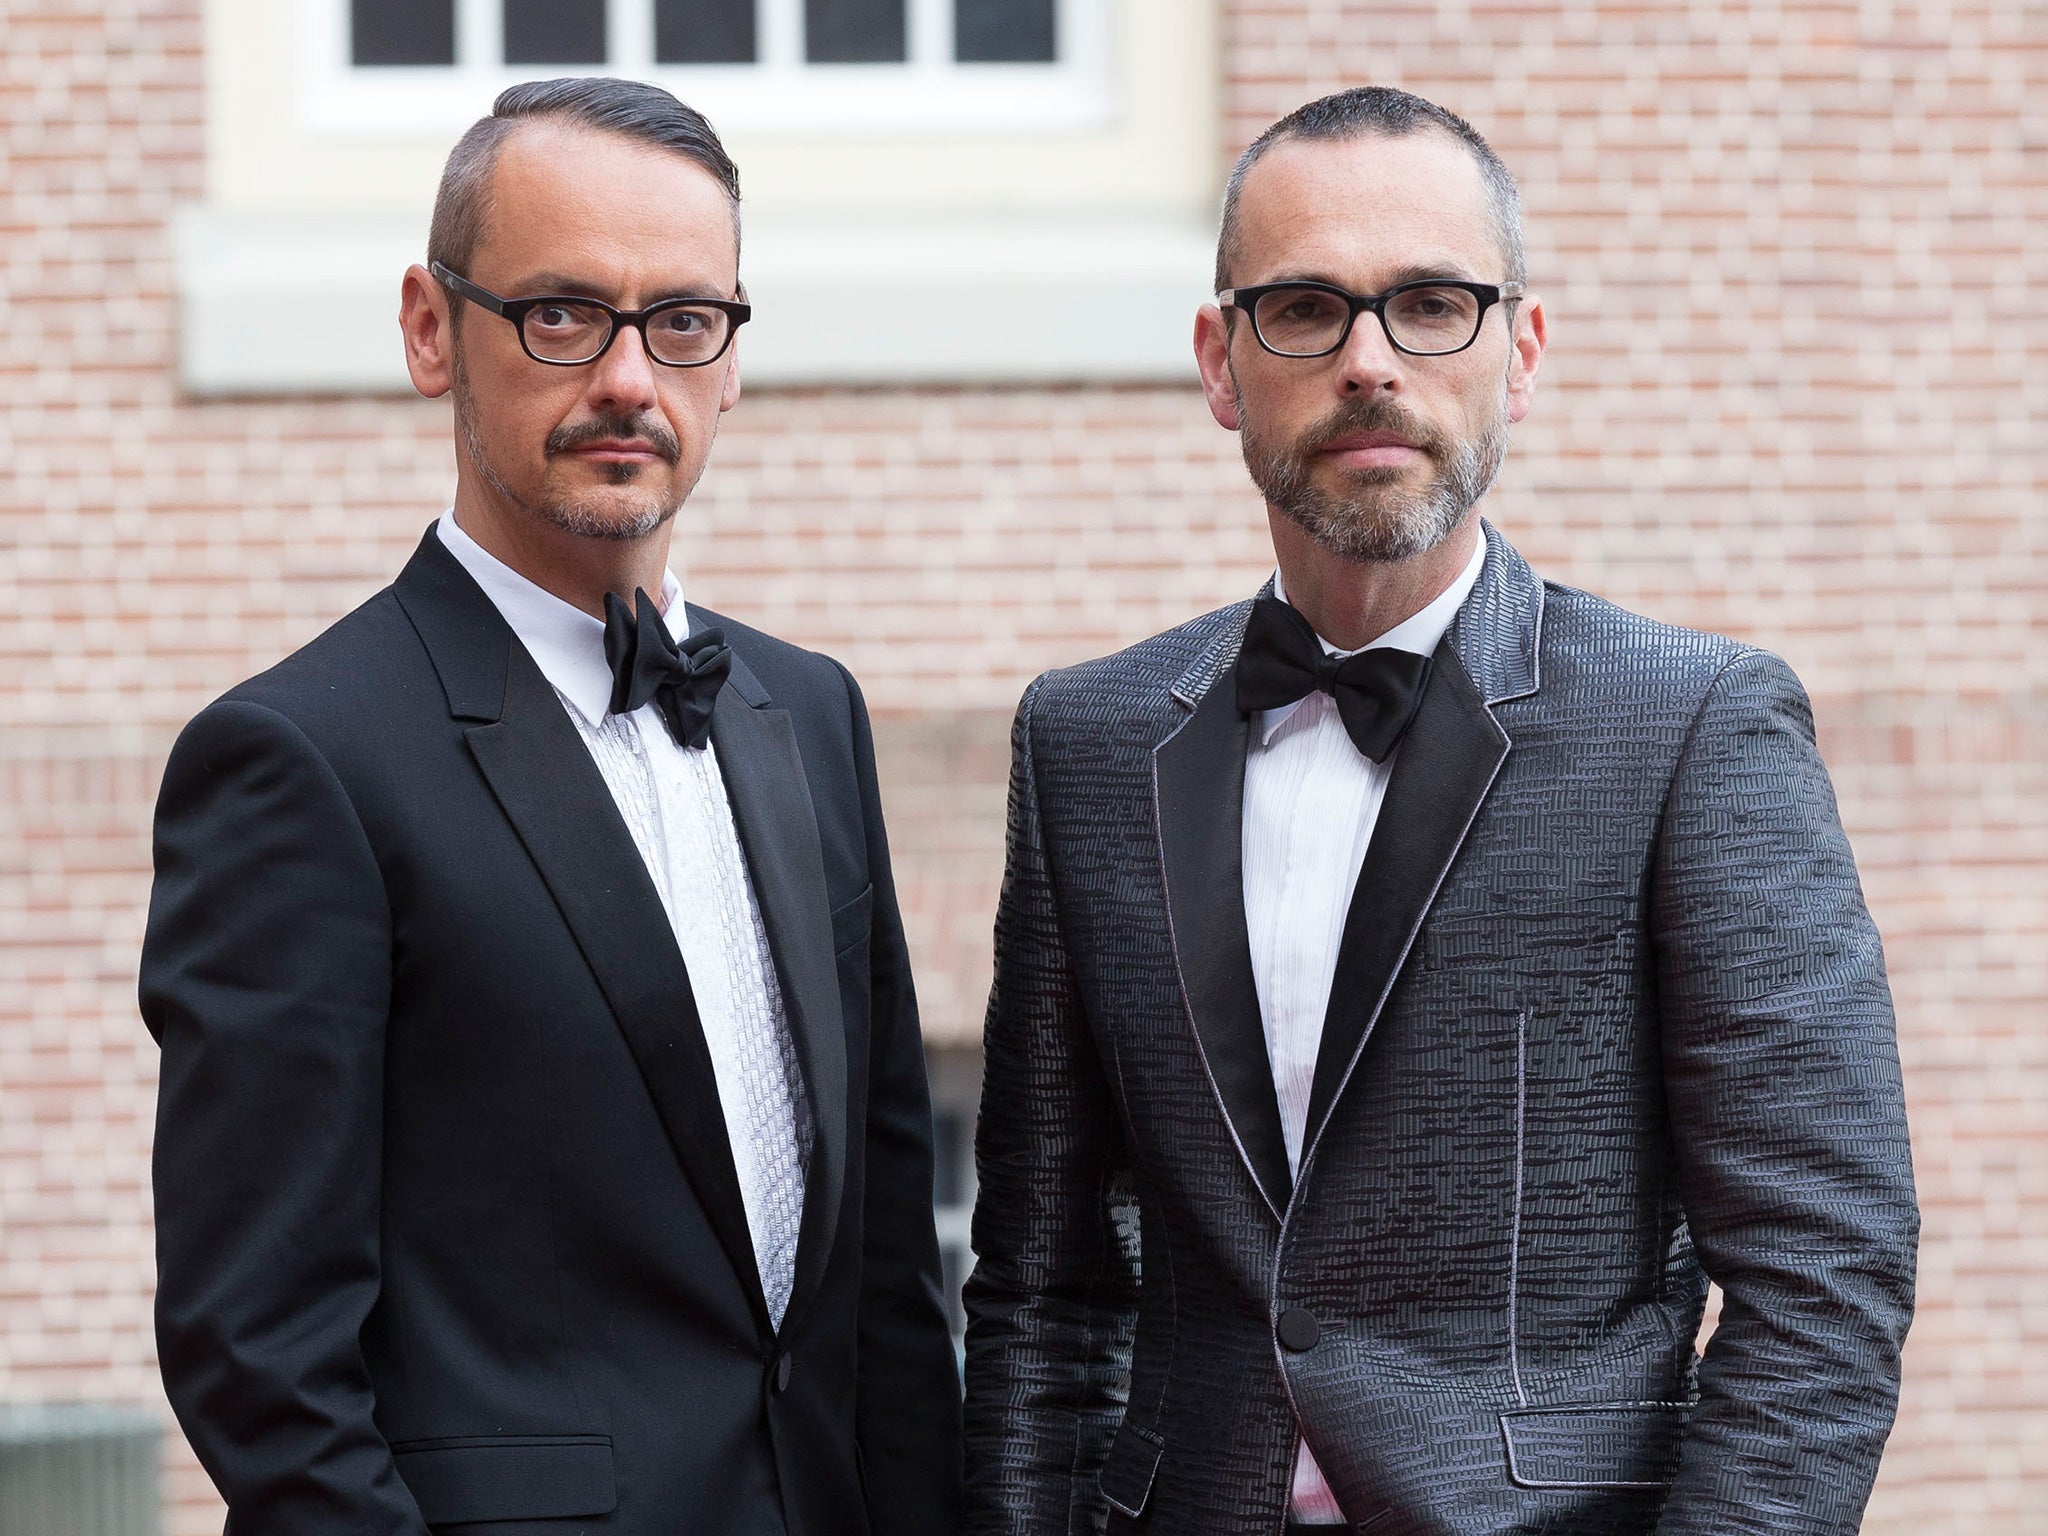 Viktor and Rolf's decision to ditch ready-to-wear echoes the recent move by Jean Paul Gaultier